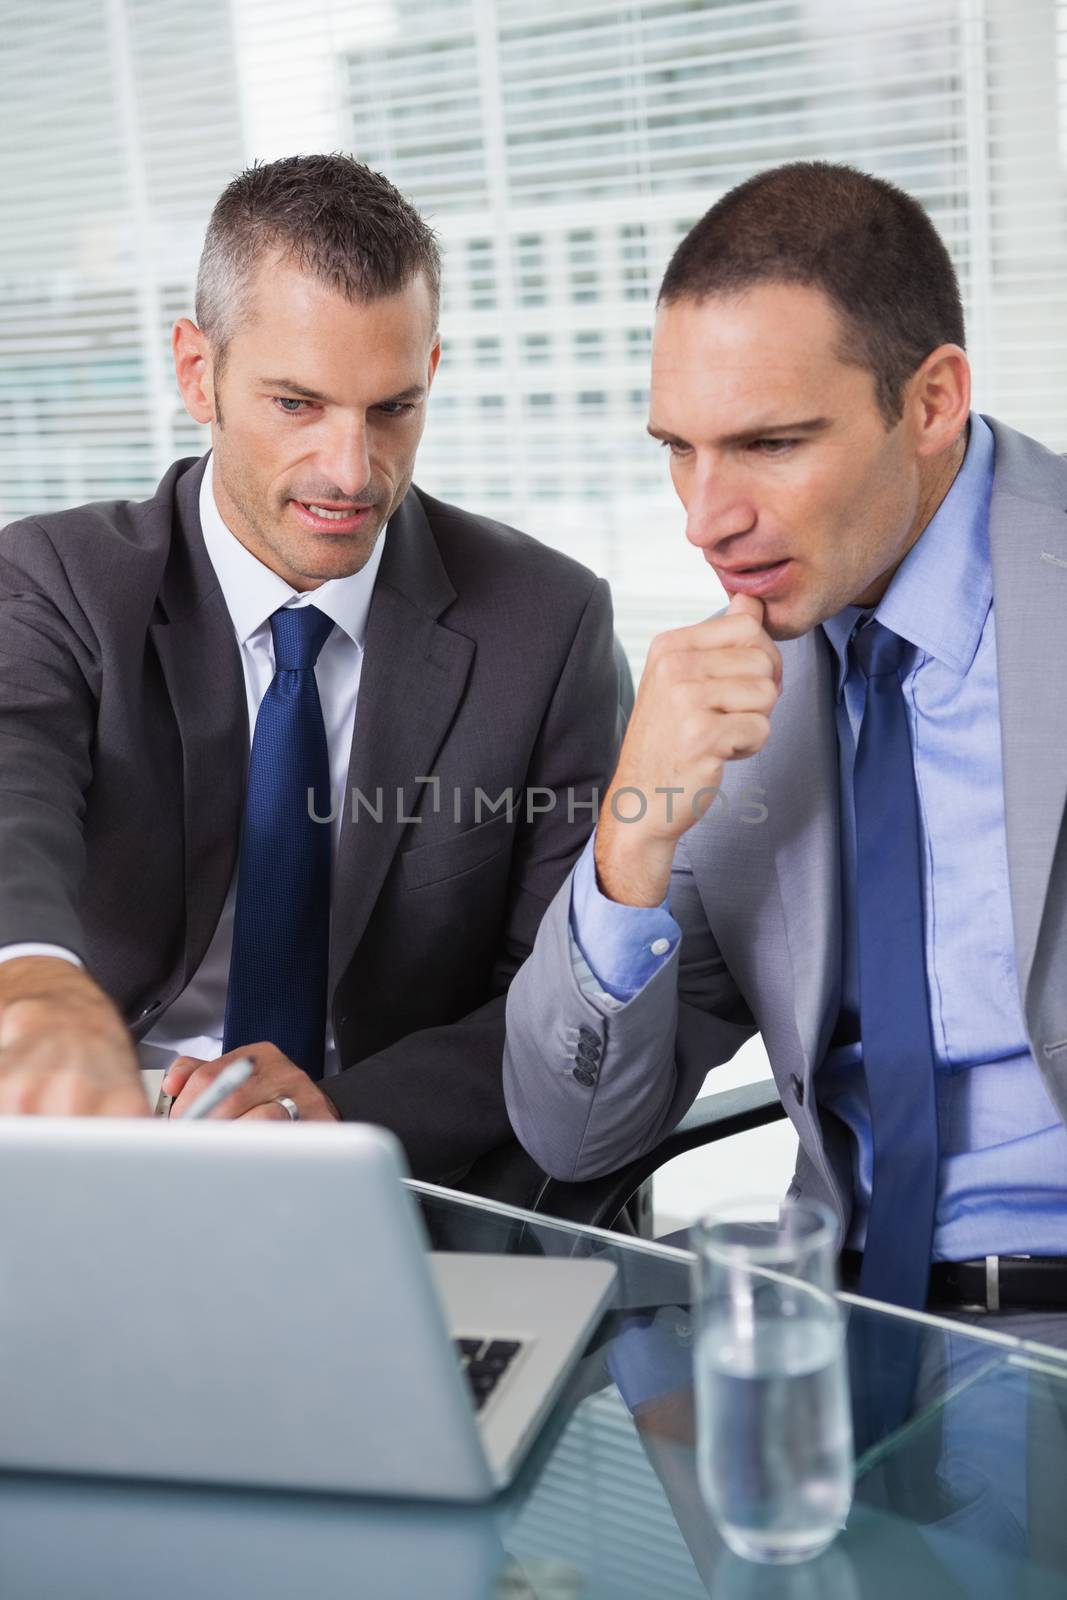 Concentrated businessmen analyzing documents on their laptop by Wavebreakmedia